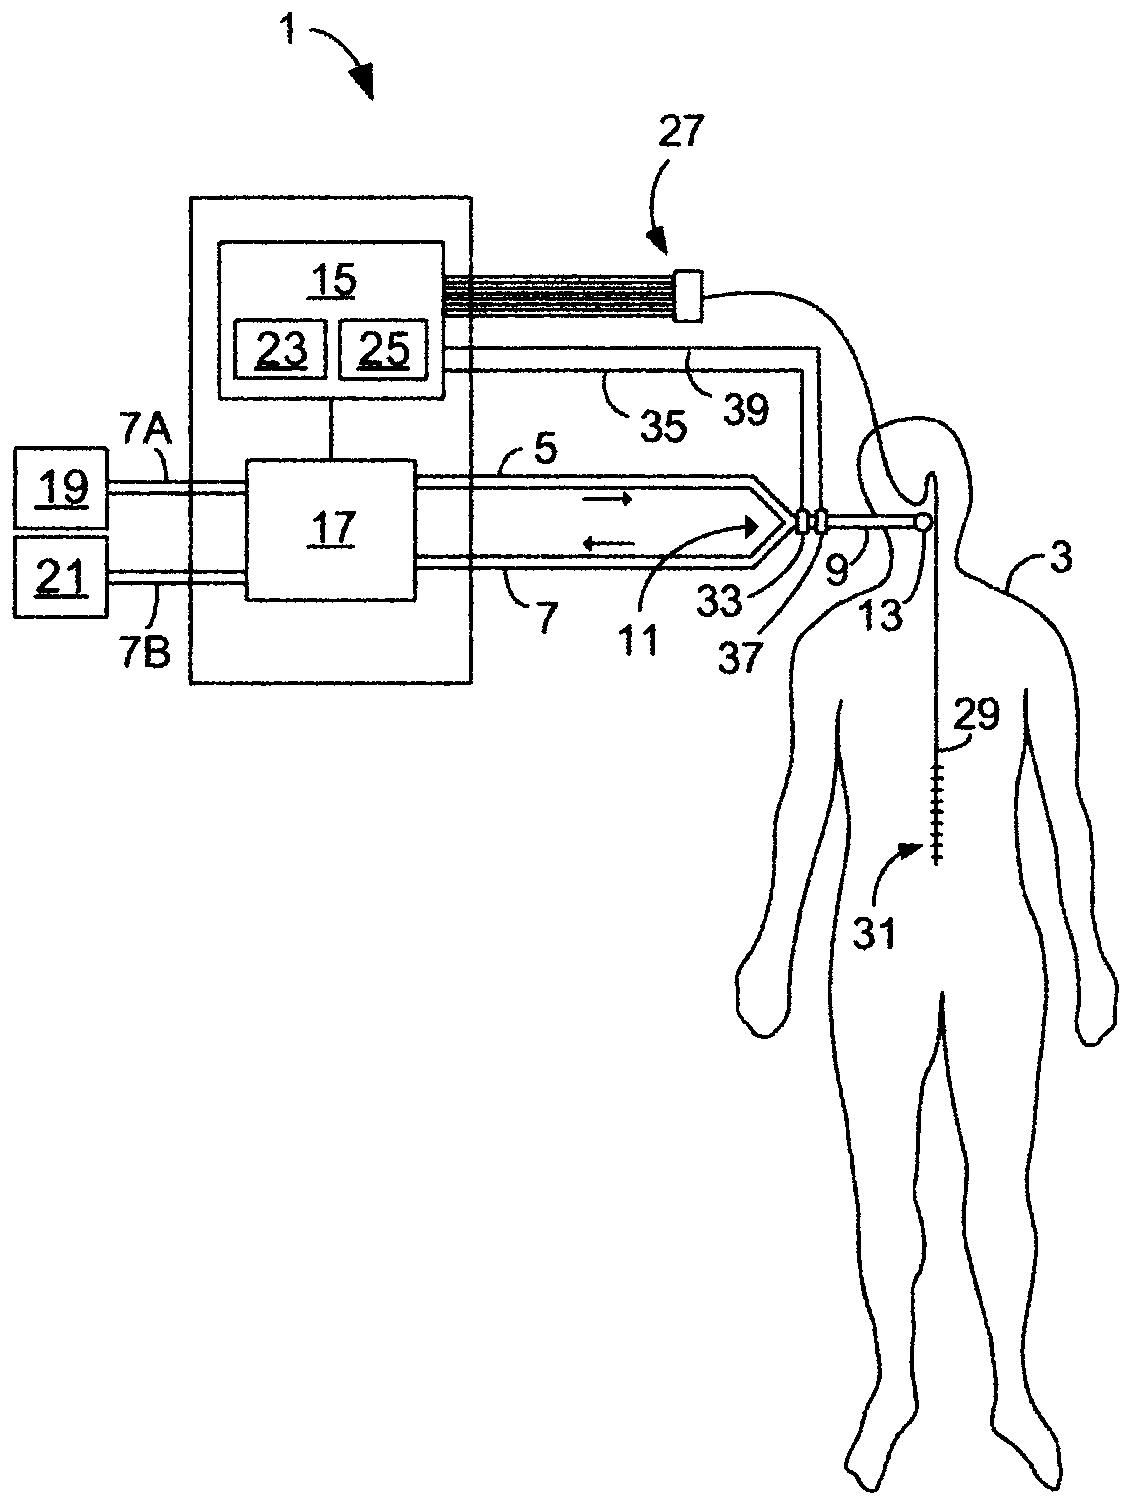 Bioelectrically controlled ventilation mode